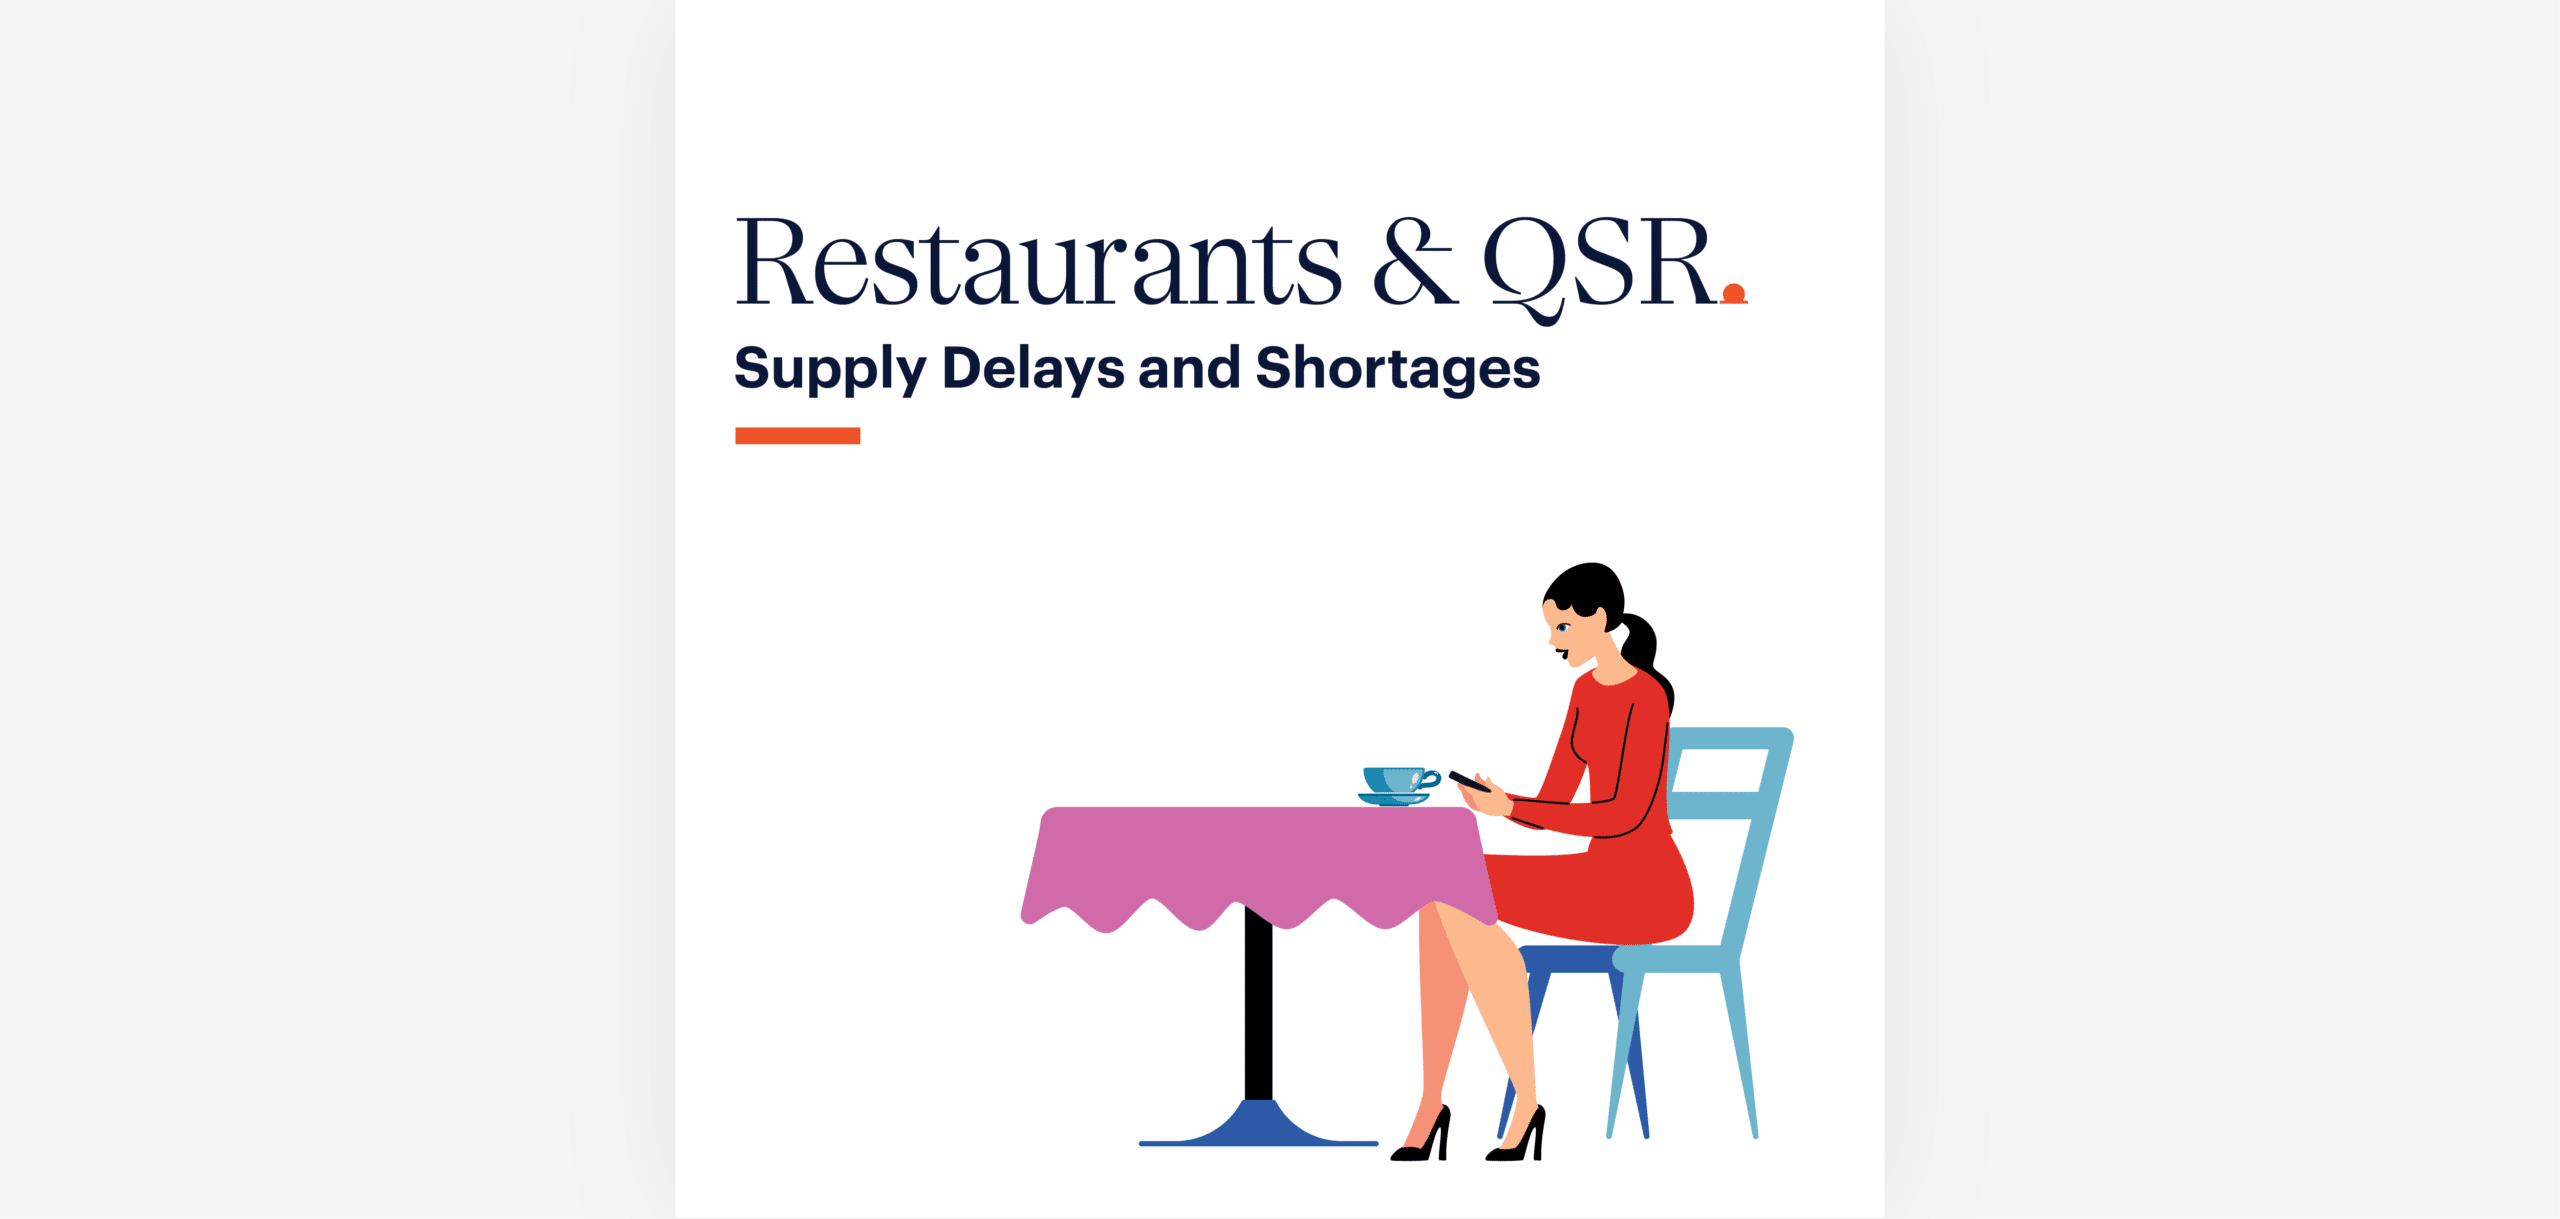 How Restaurants and QSRs May Help Employees During Suppl …